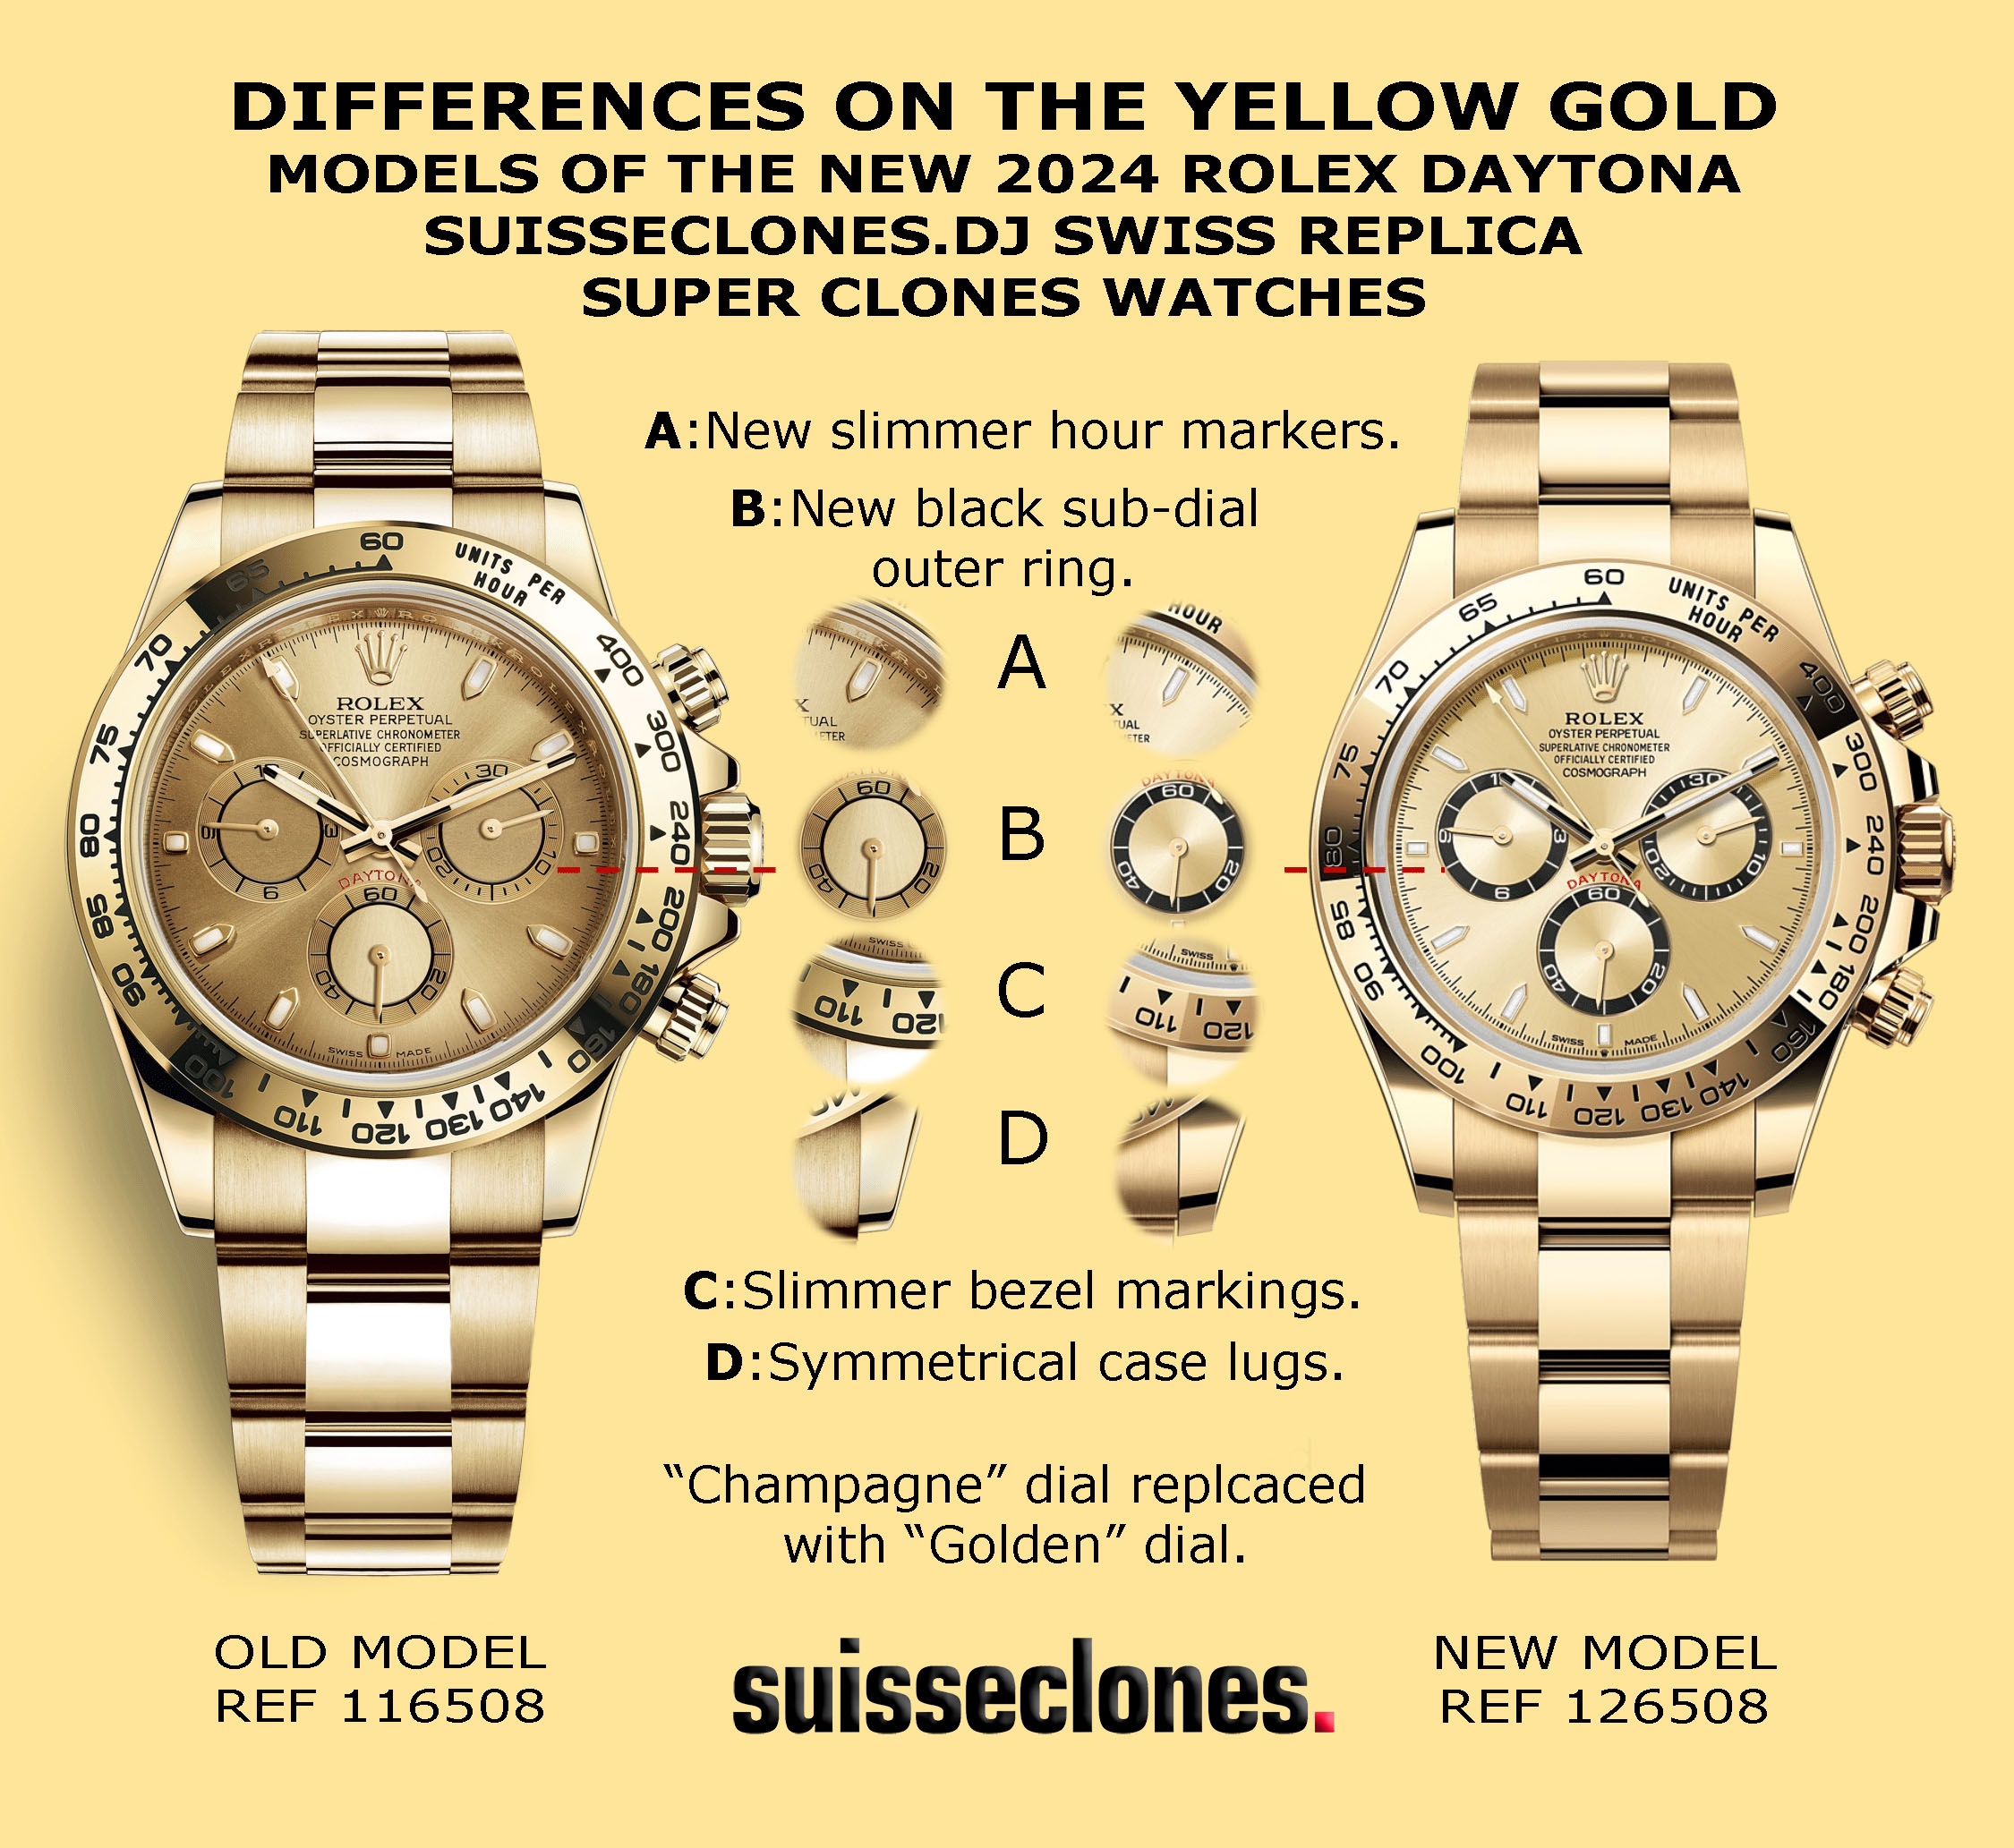 Infographics For The Upgrades Of The Suisseclones.dj 2024 Swiss Replica Daytona Yellow And Rose Gold Super Clone Watches.